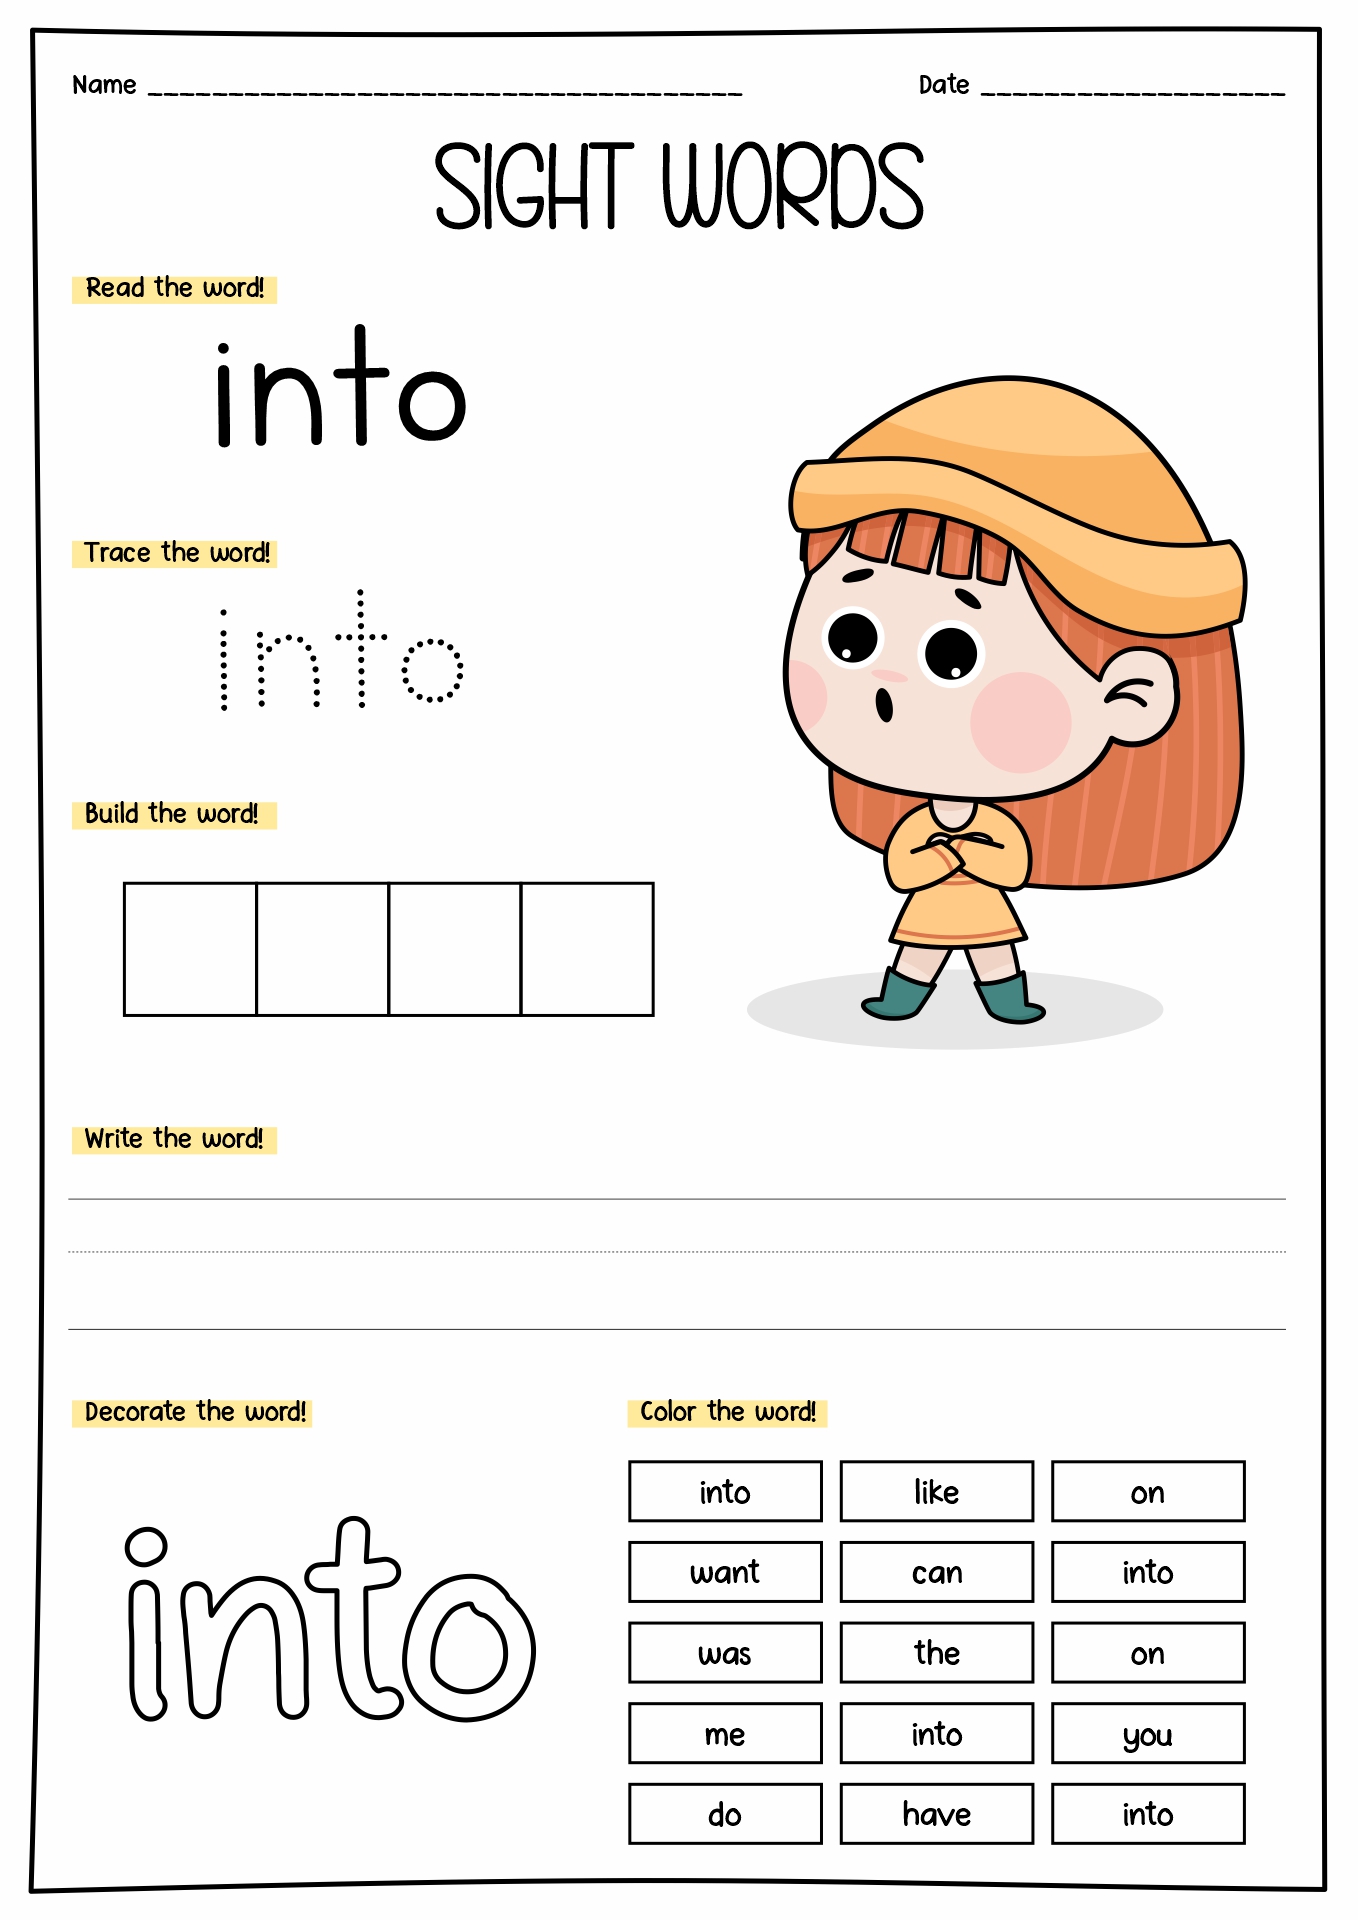 12 Best Images of Worksheets Christmas Rhyming For ...